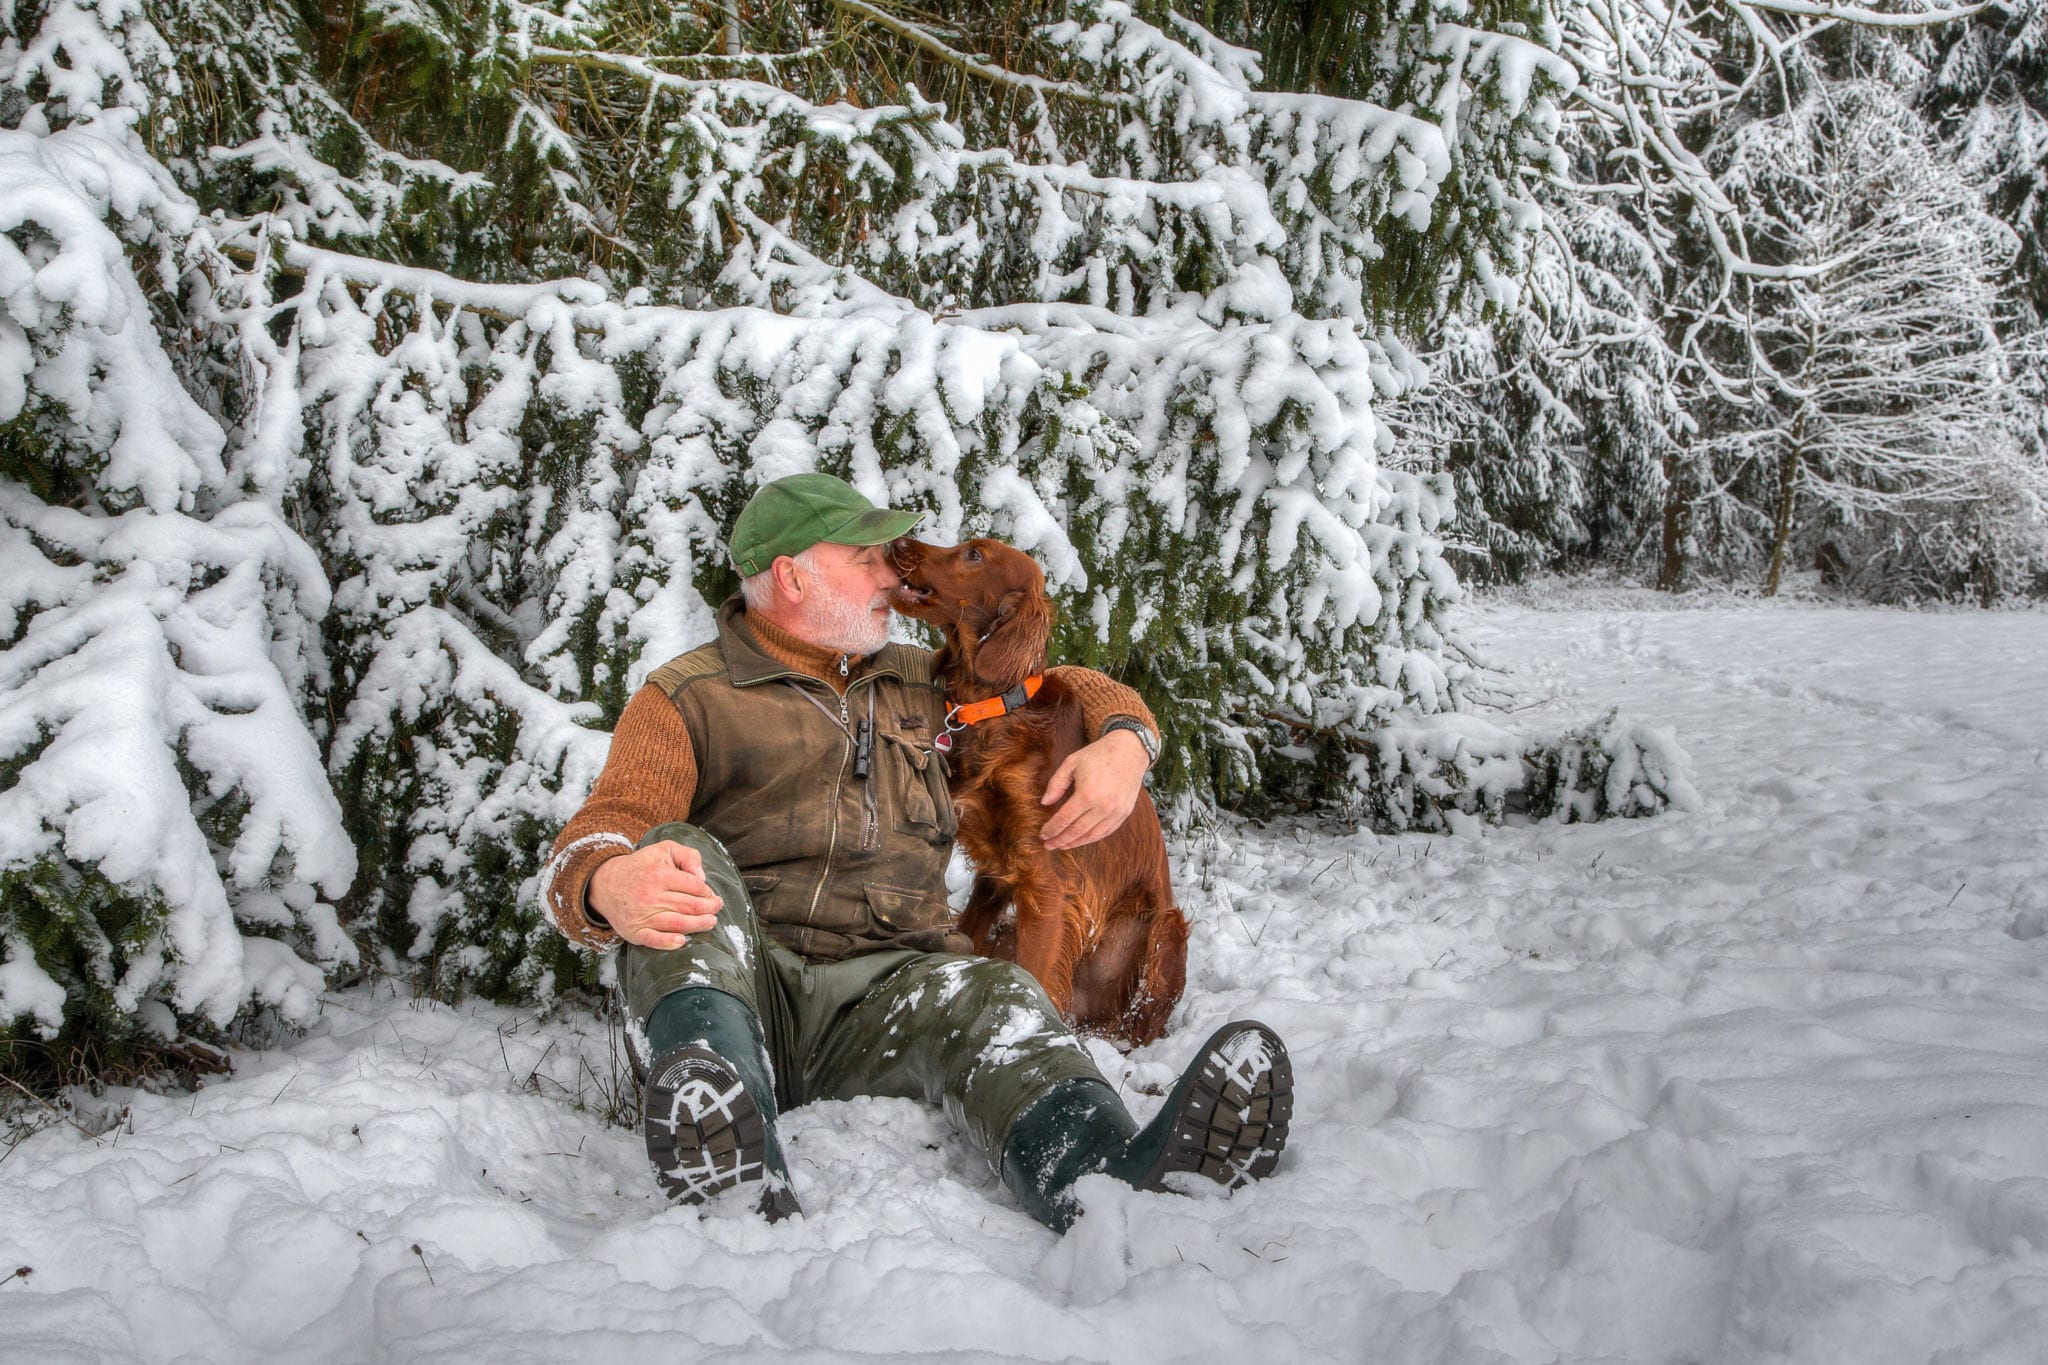 Close friends. In the snowy winter forest an elderly hunter sits in the snow with his young Irish Setter hunting dog and is tenderly bitten in the nose."r